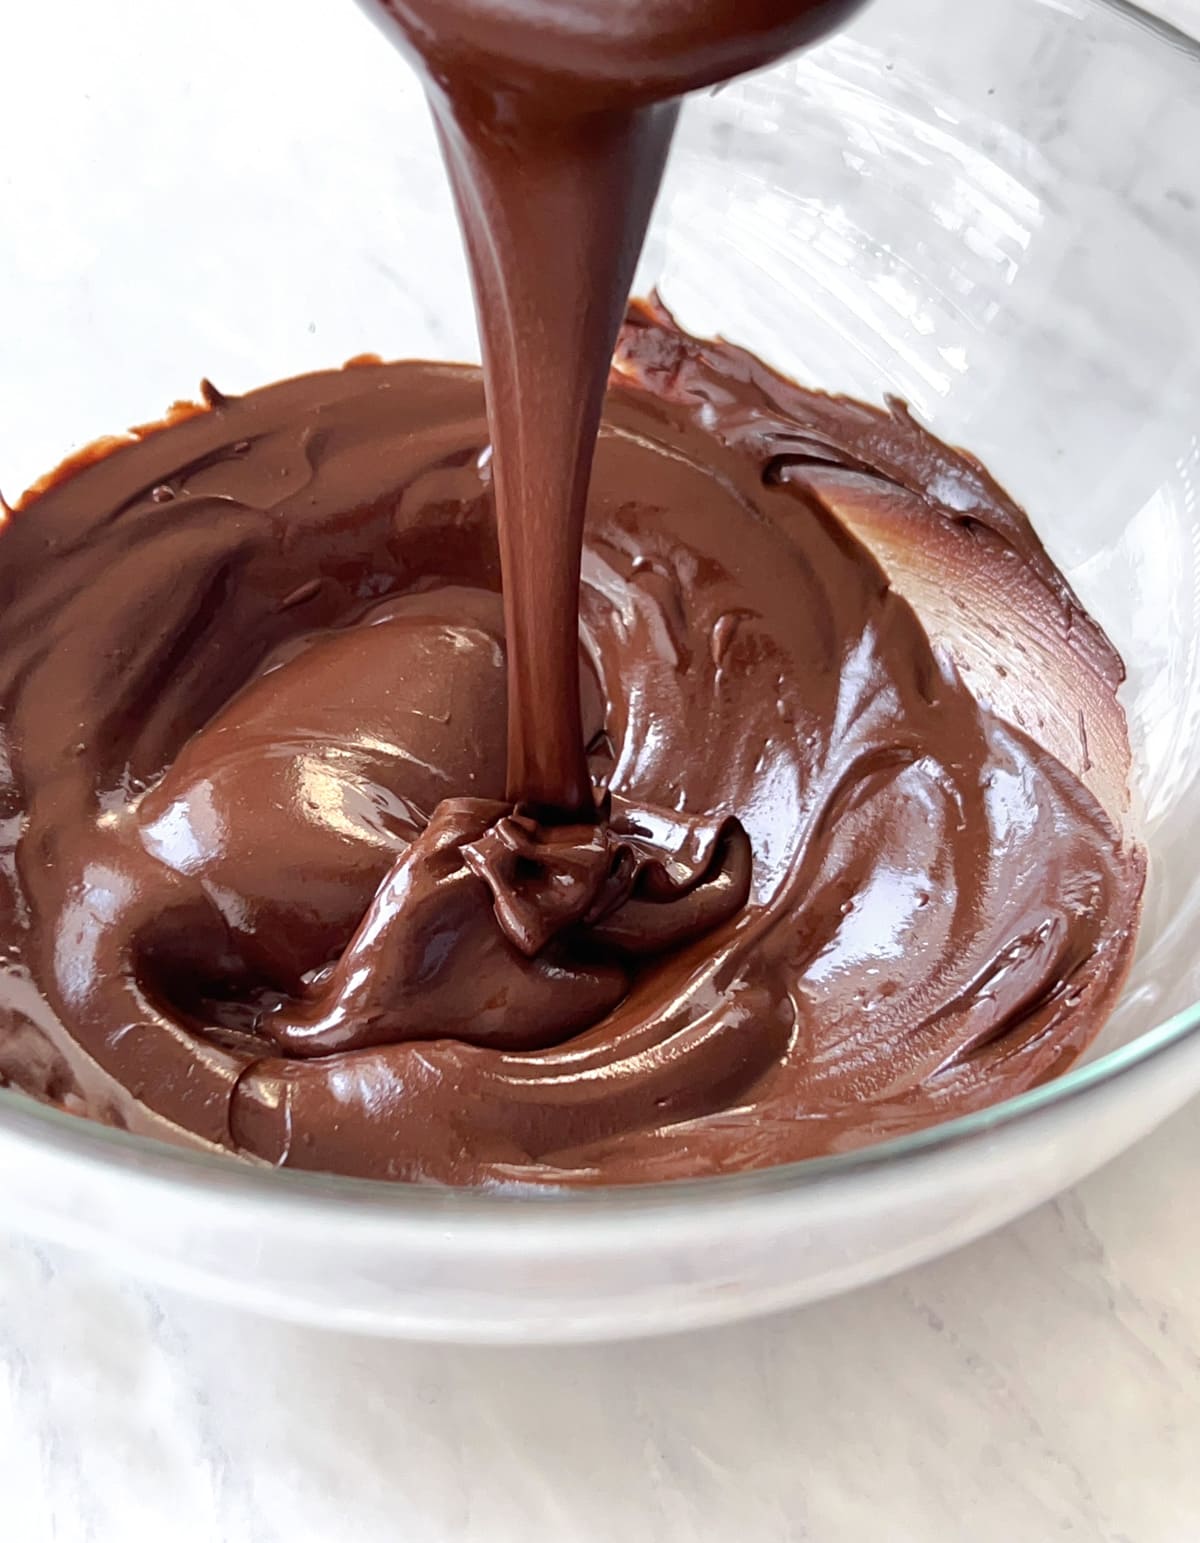 Bowl full of glossy melted dairy free chocolate.